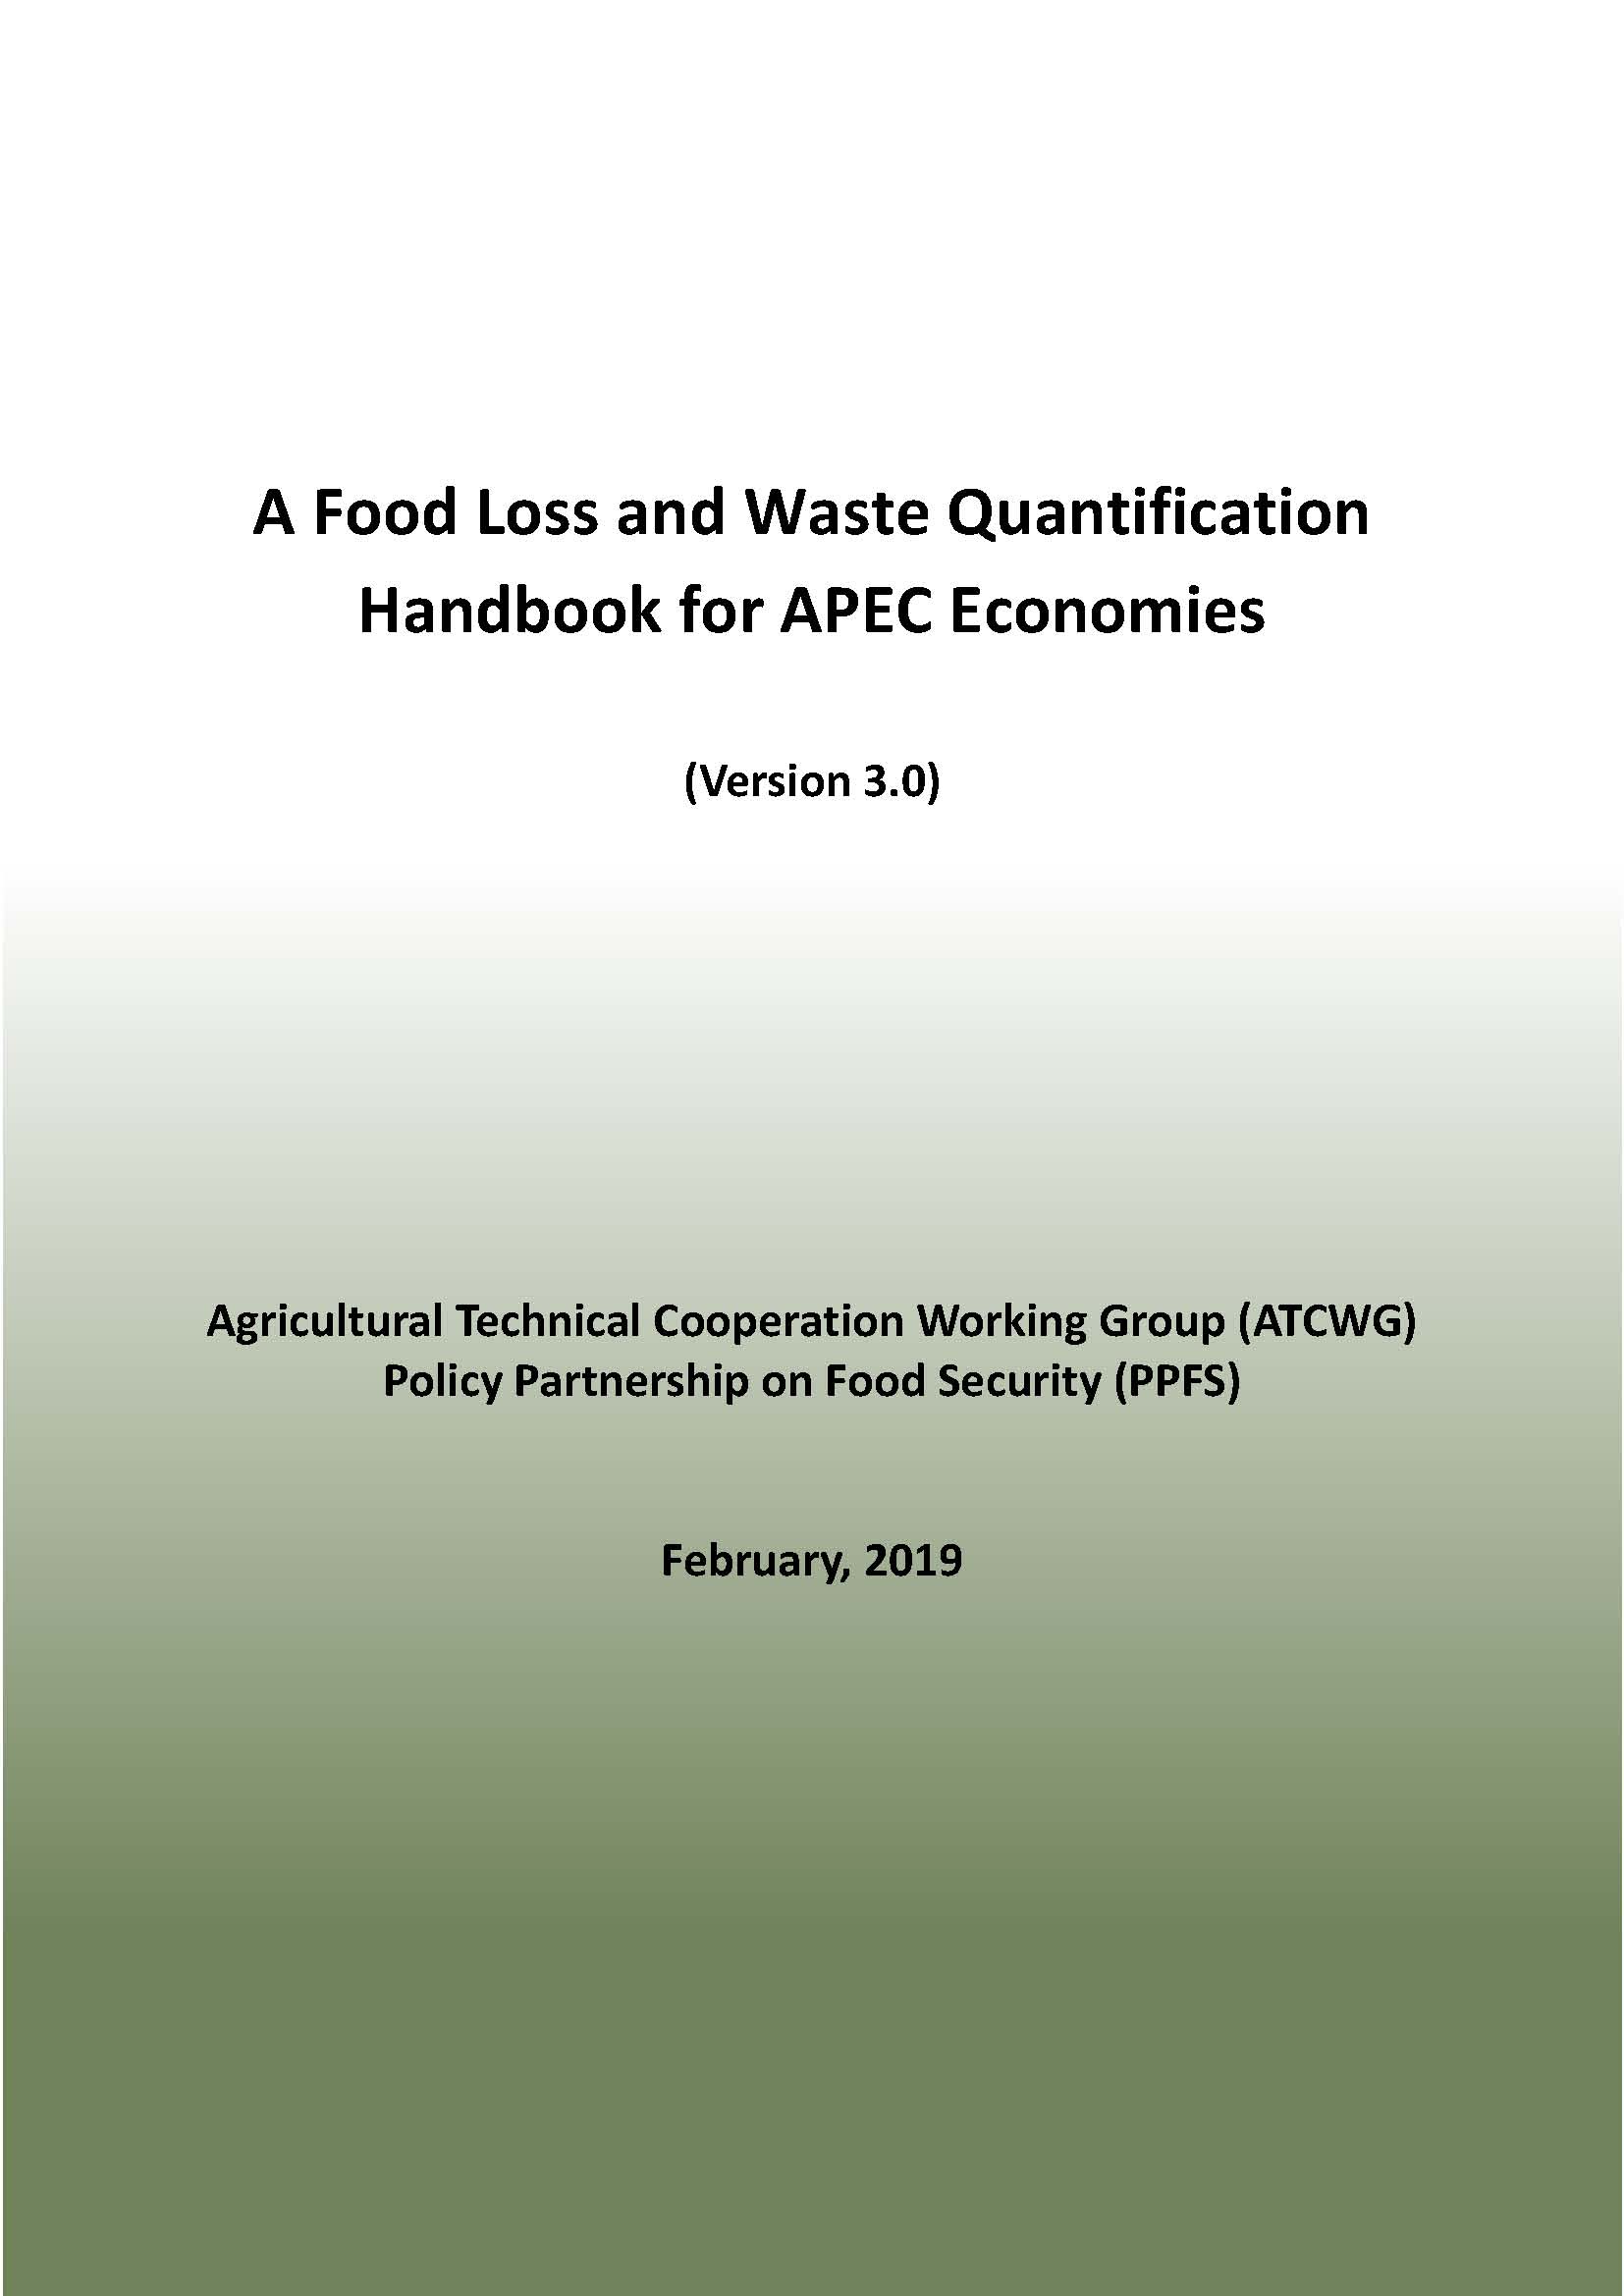 A Food Loss and Waste Quantification Handbook for APEC Economies